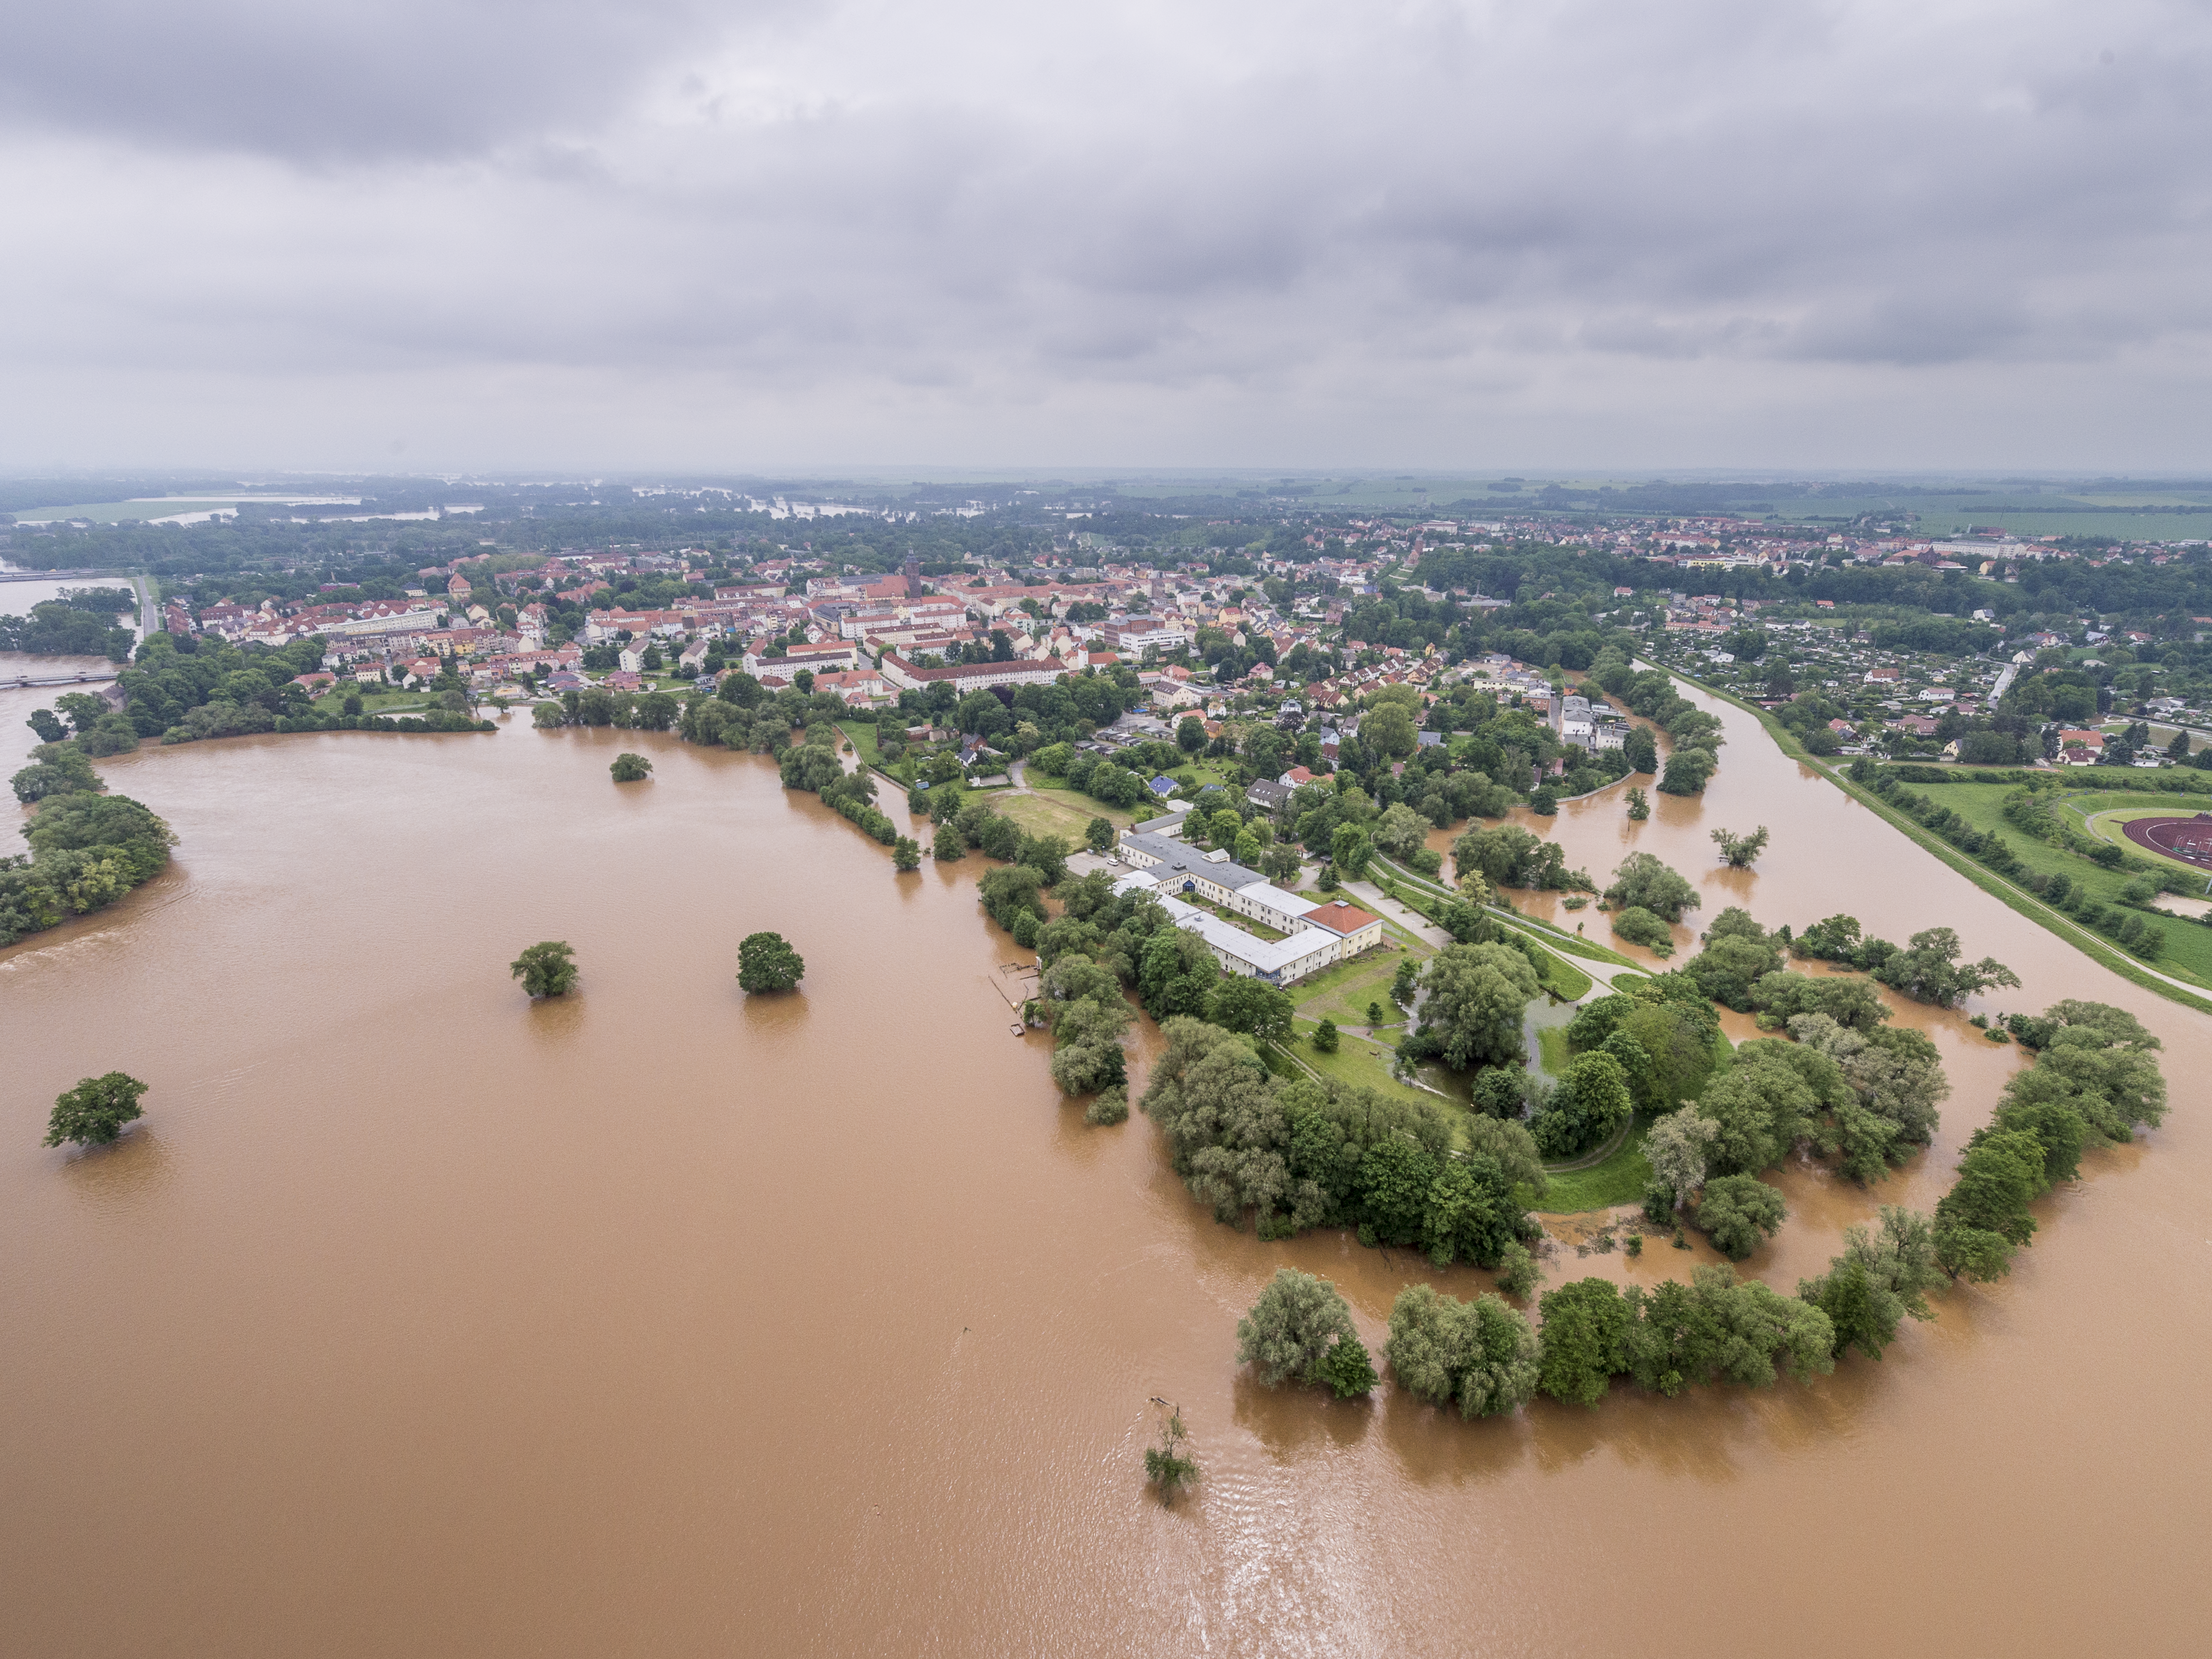 Shifts in flood generation processes exacerbate regional flood anomalies in Europe